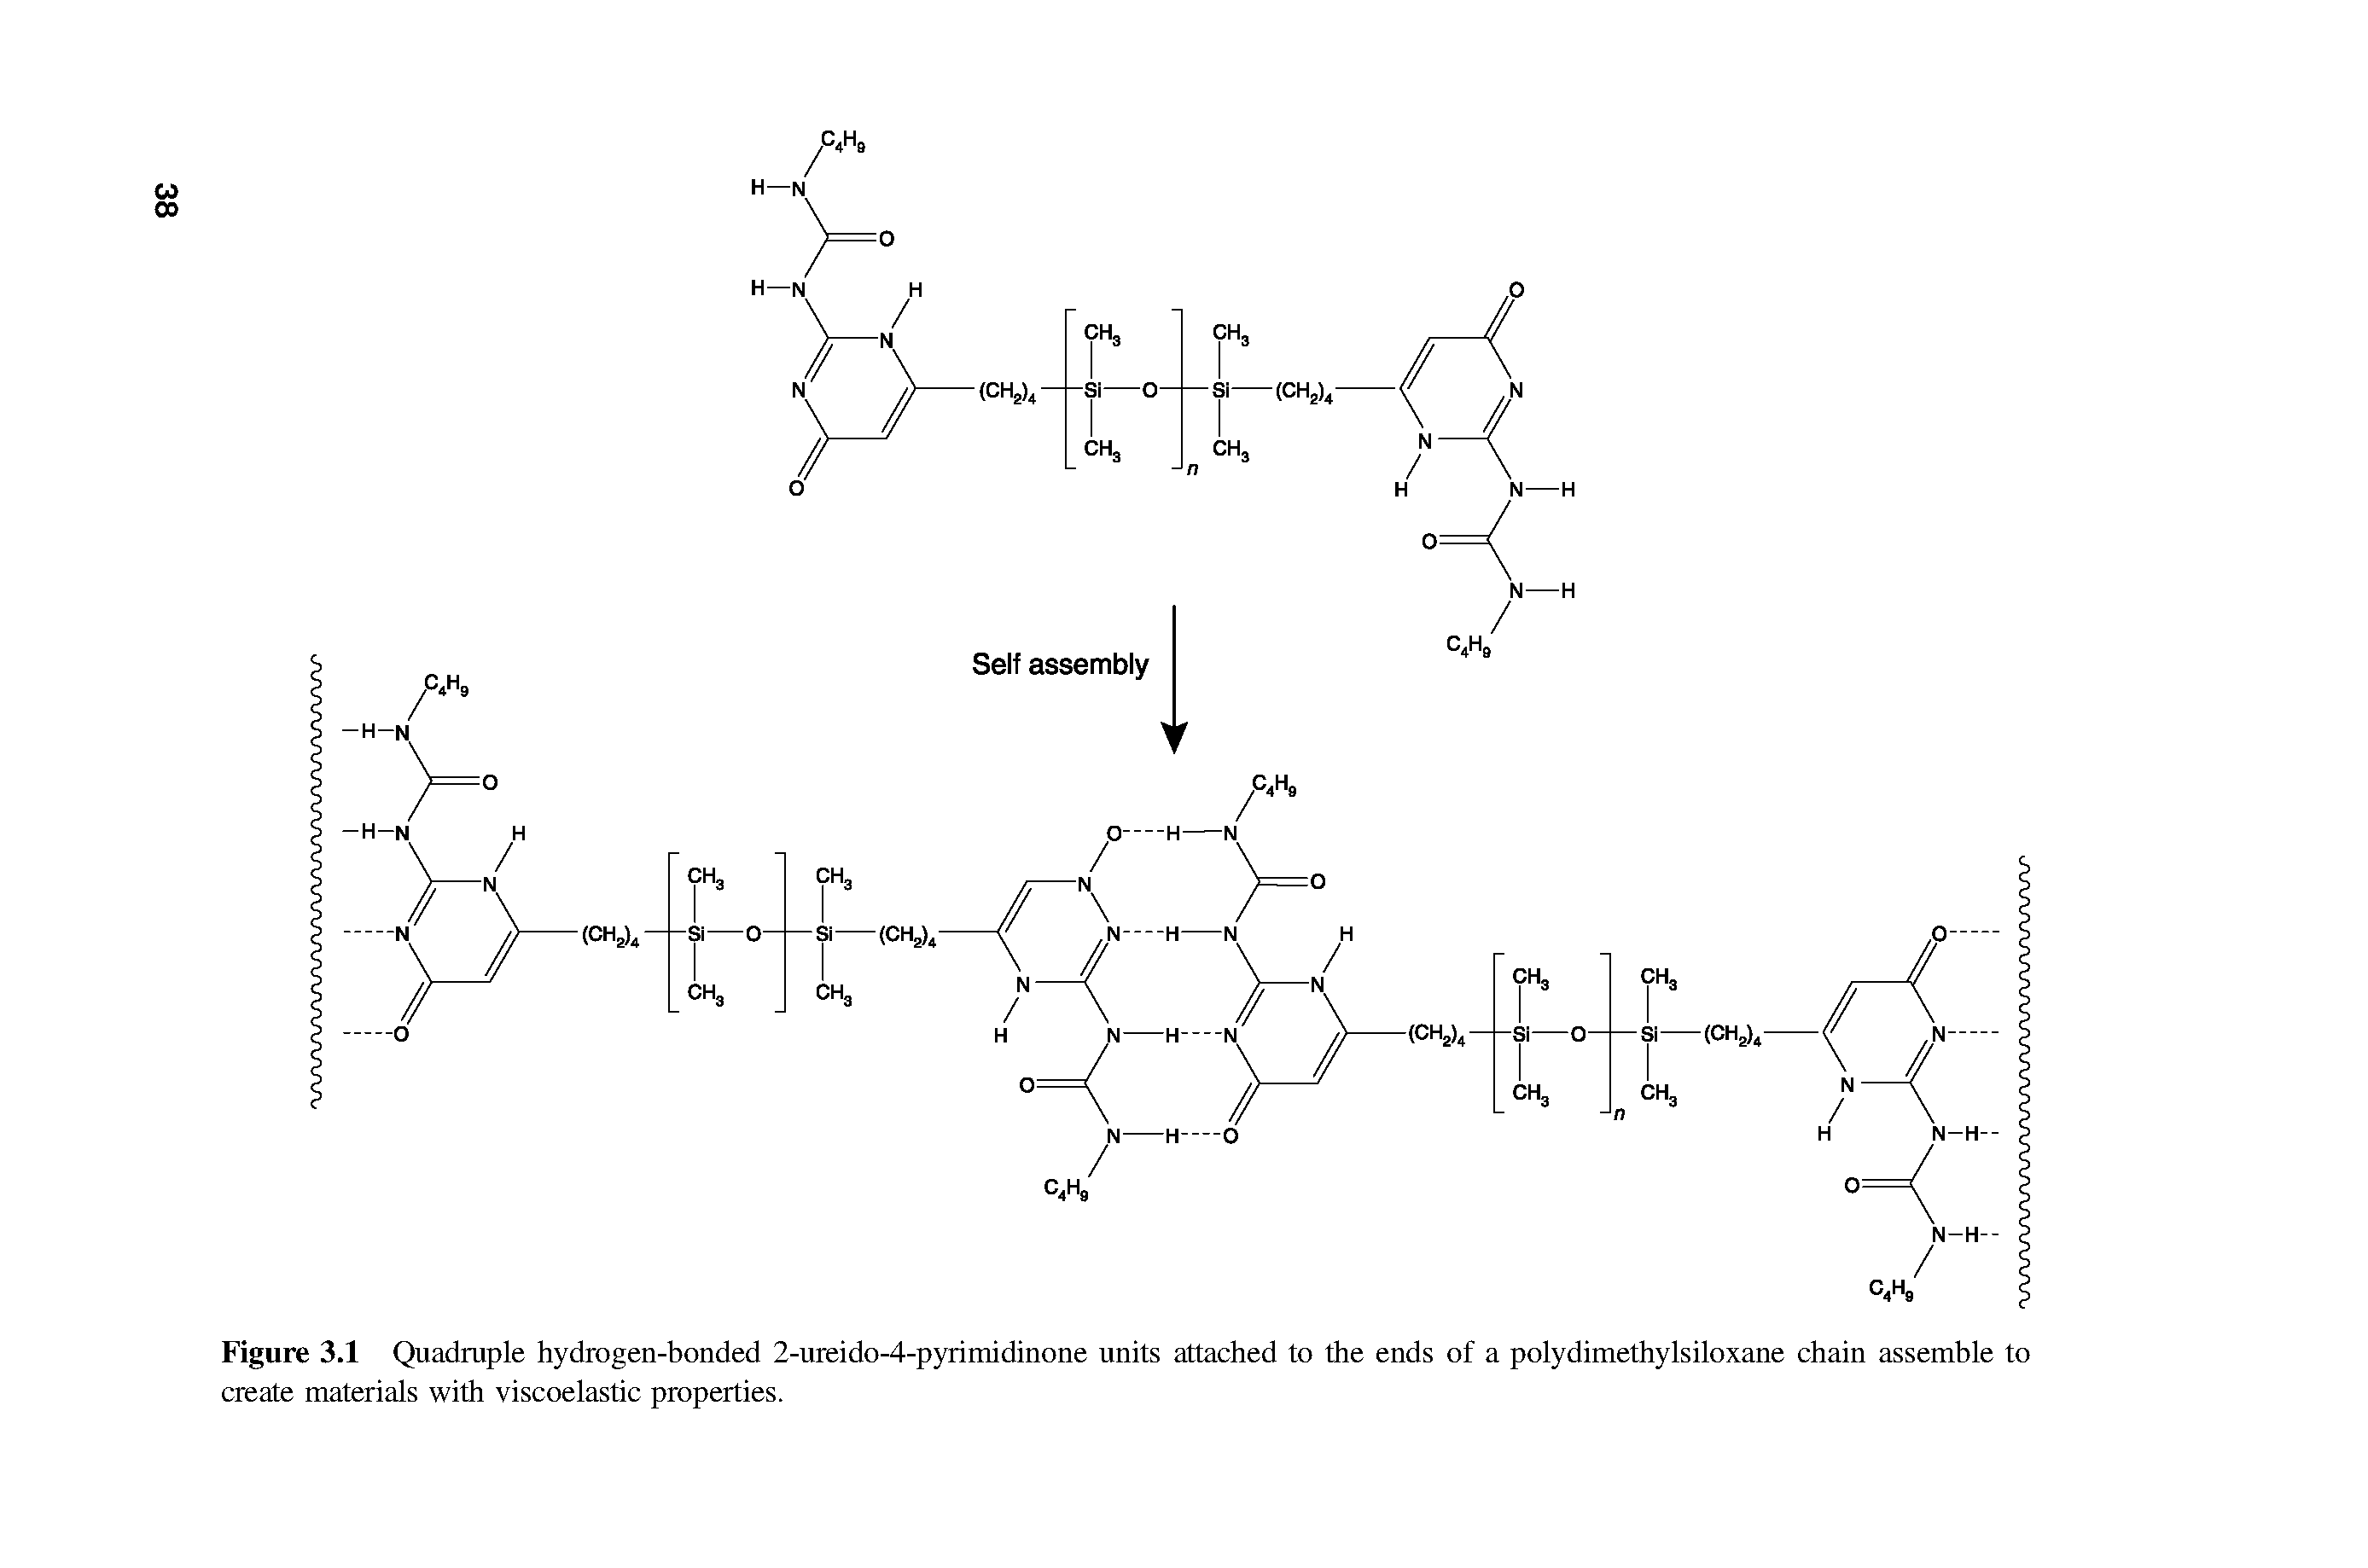 Figure 3.1 Quadruple hydrogen-bonded 2-ureido-4-pyrimidinone units attached to the ends of a polydimethylsiloxane chain assemble to create materials with viscoelastic properties.